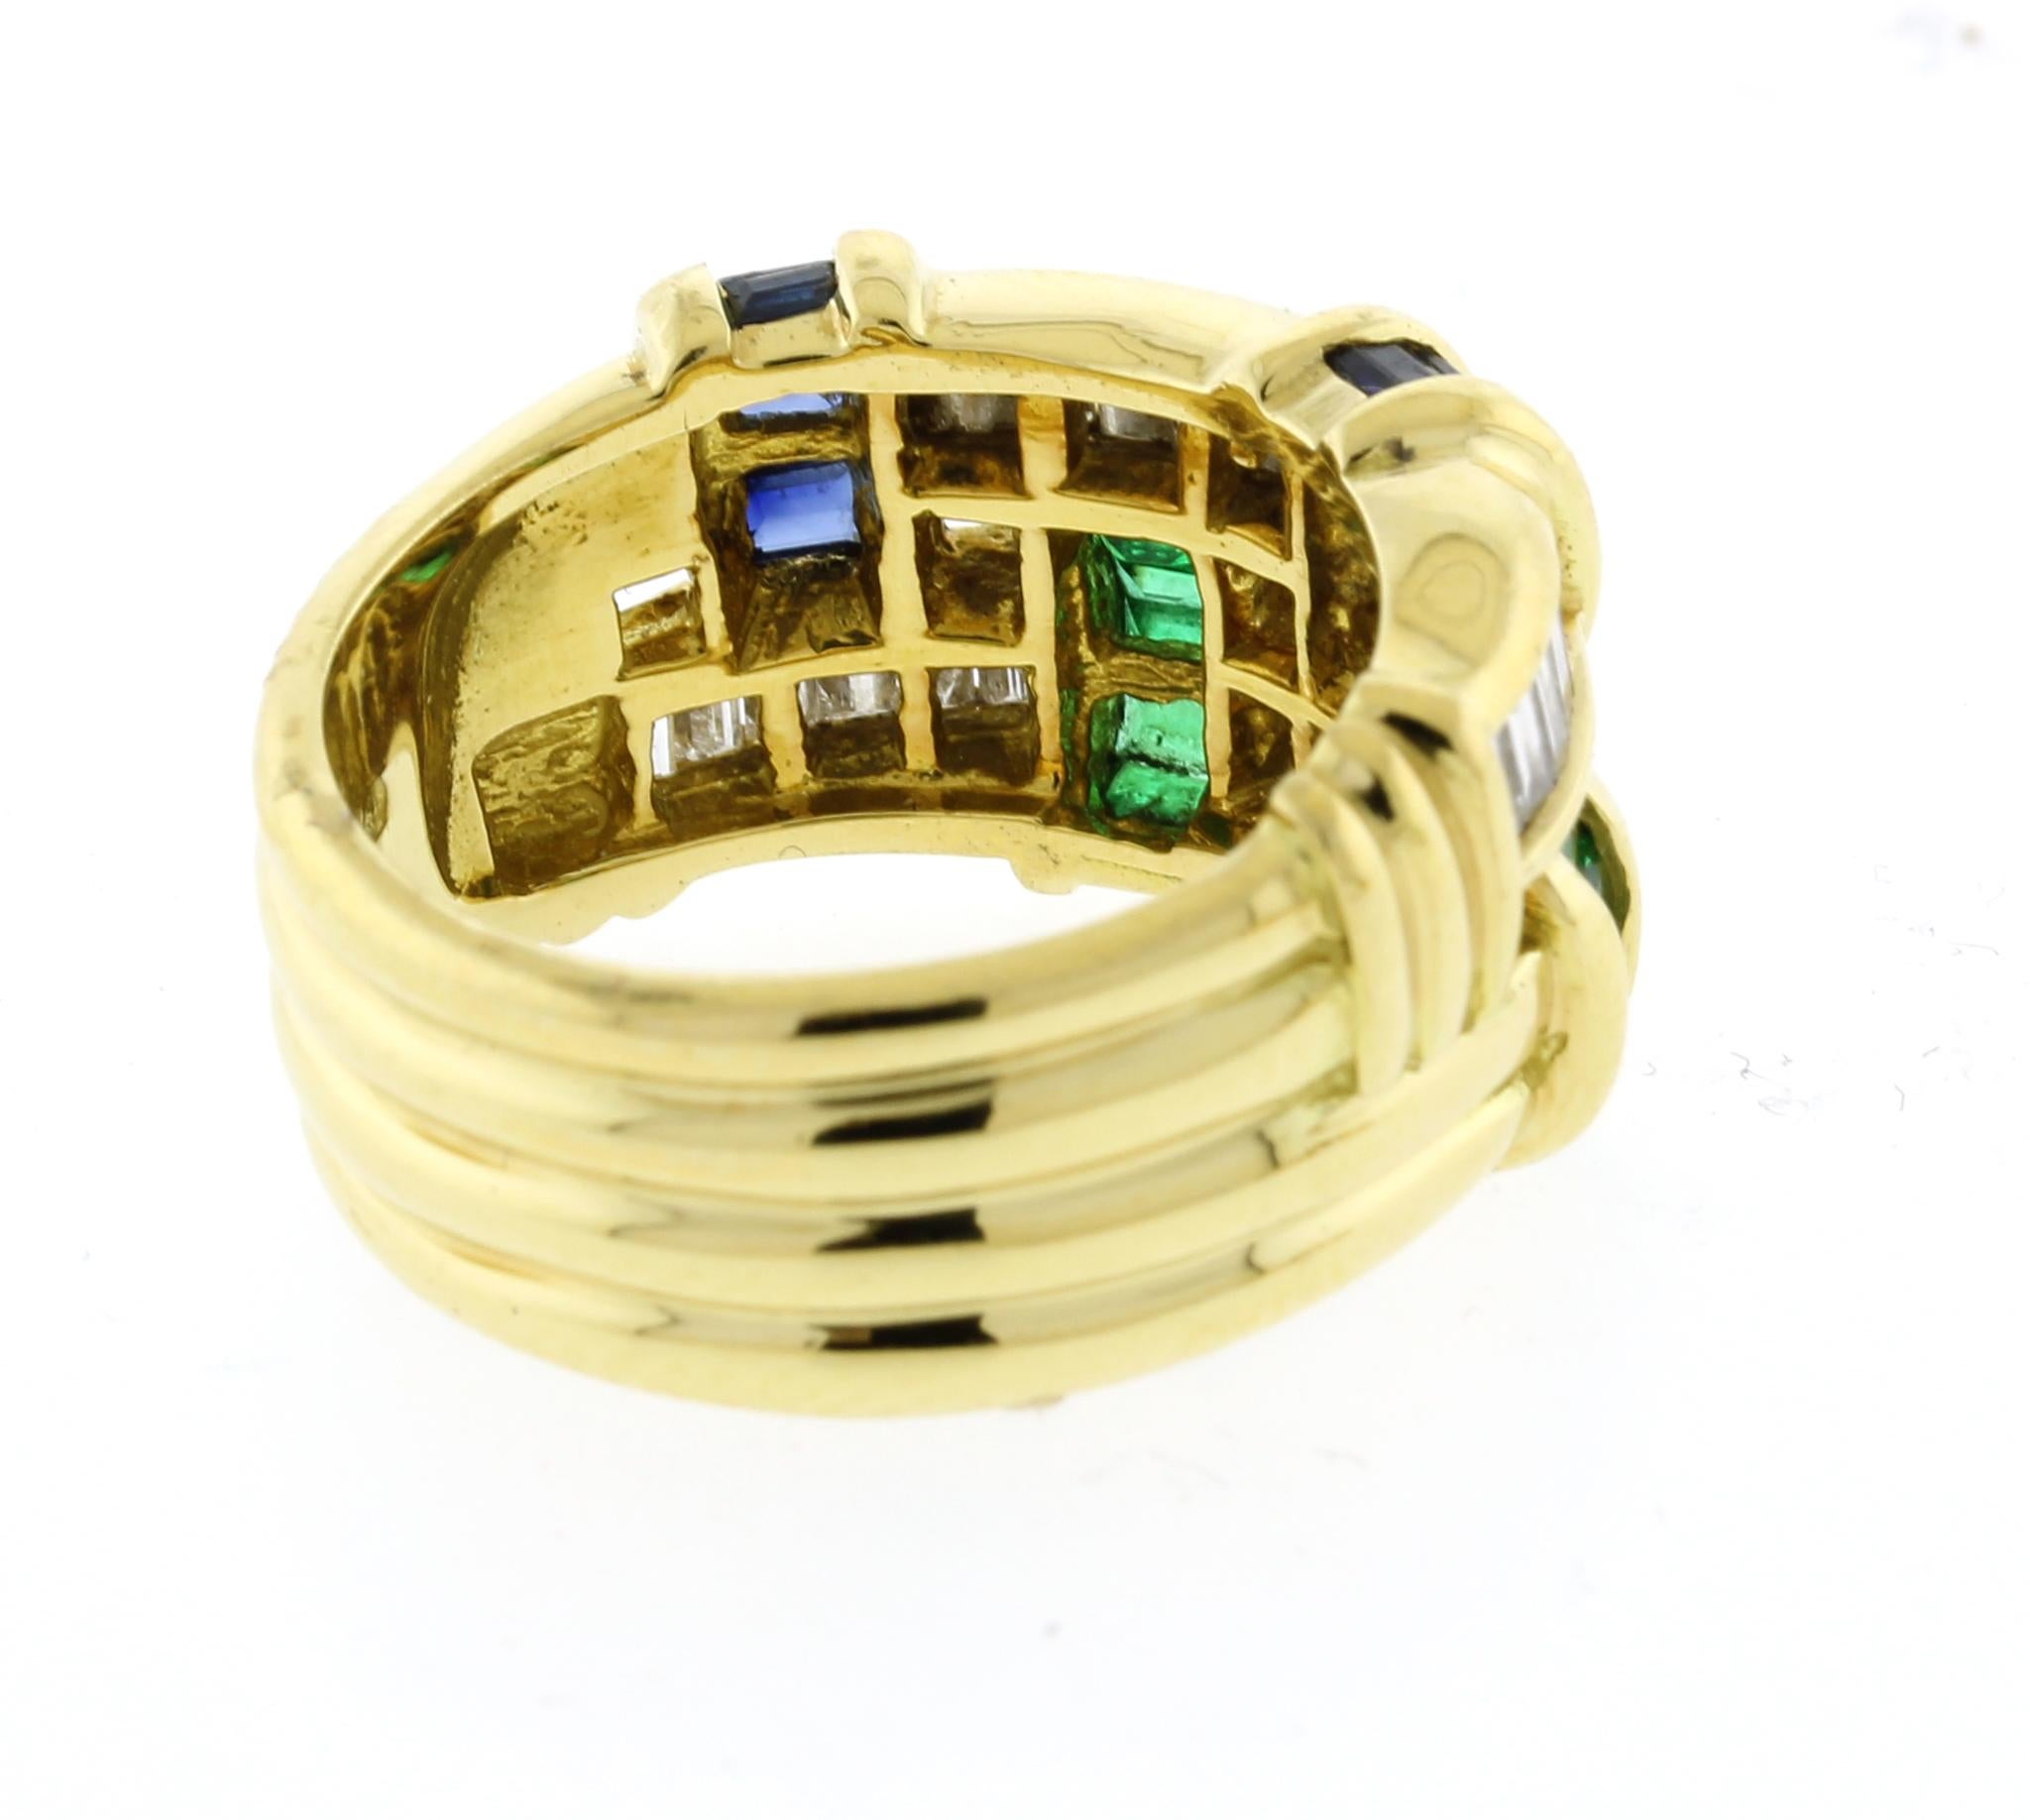 Baguette Cut Charles Krypell Diamond, Sapphire and Emerald Ring